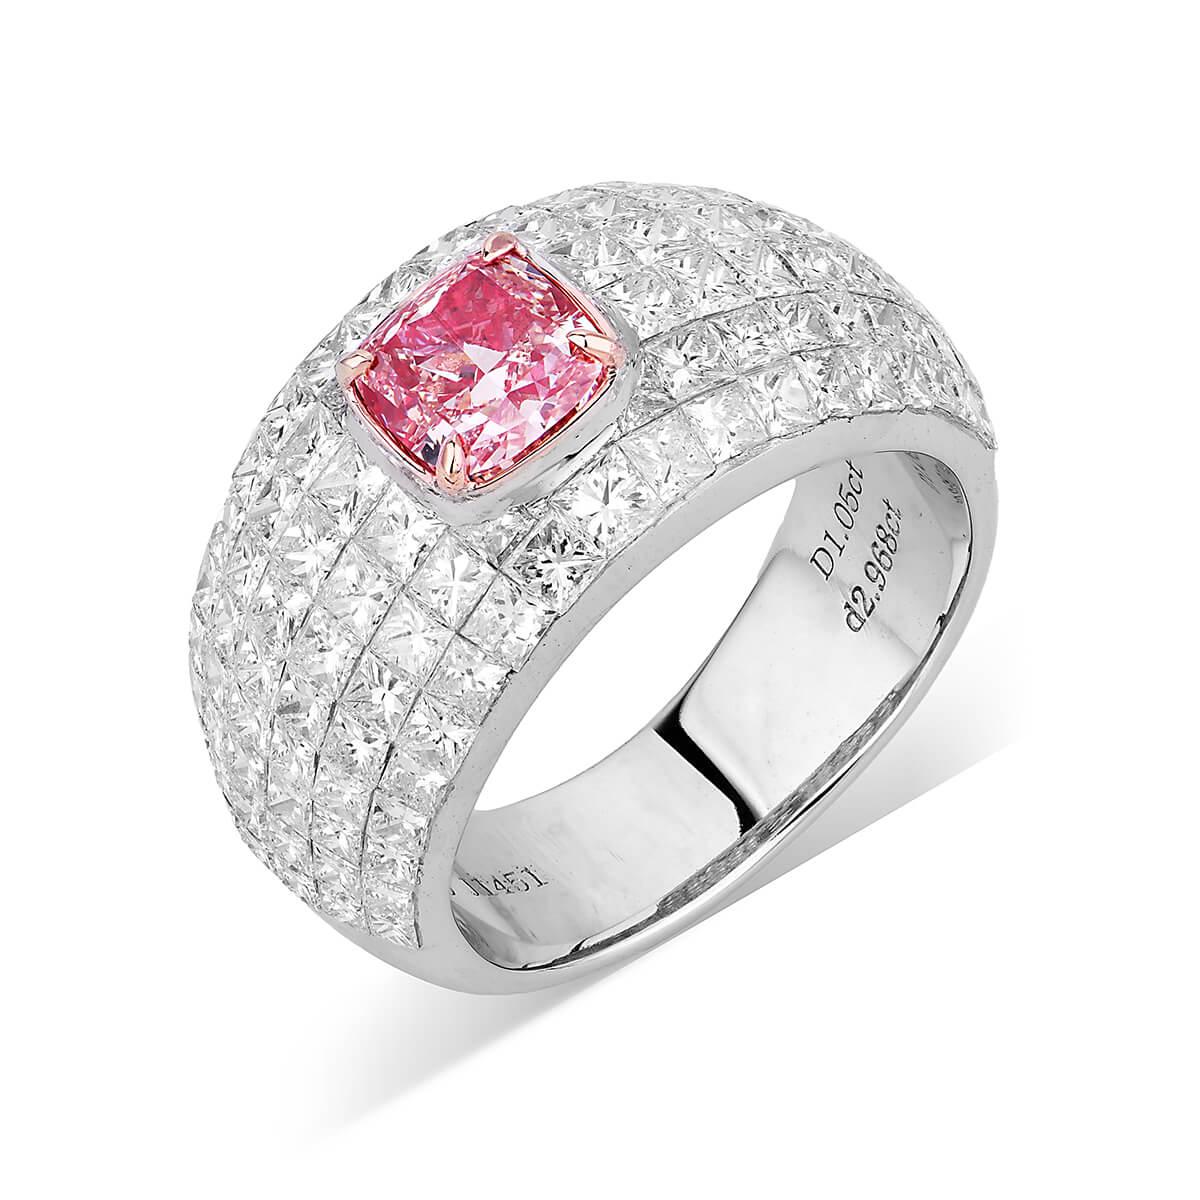 This piece consists of a natural untreated 1.05 fancy pink main diamond completely surrounded by smaller natural white diamonds, making up a total of 4.02 Carats. This piece has been expertly crafted using 18 Karat White Gold. Cushion Shape.